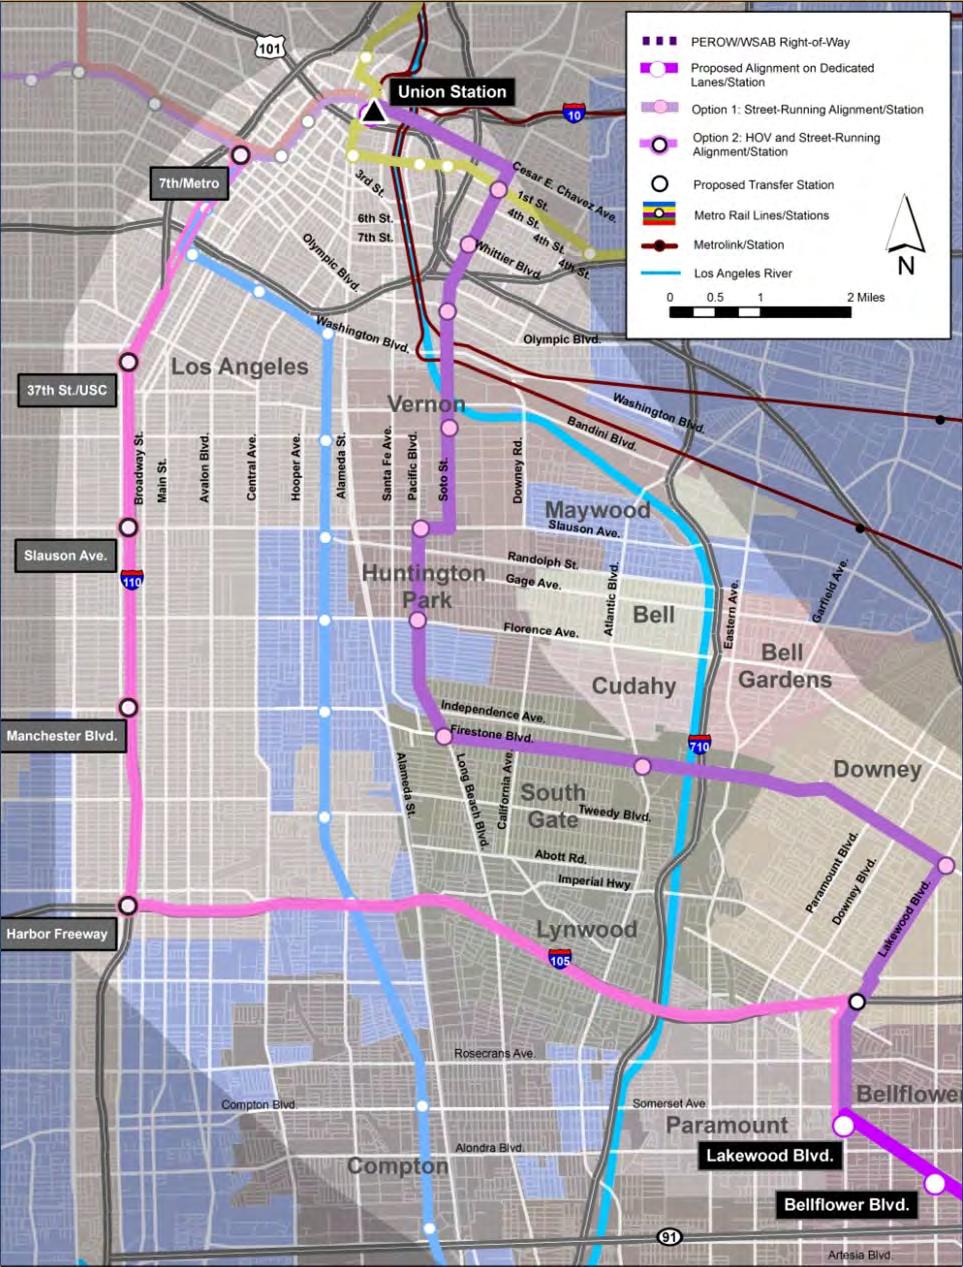 BRT Alternative Alignment Northern Connection Area: Street service Transitway and freeway HOV Lane